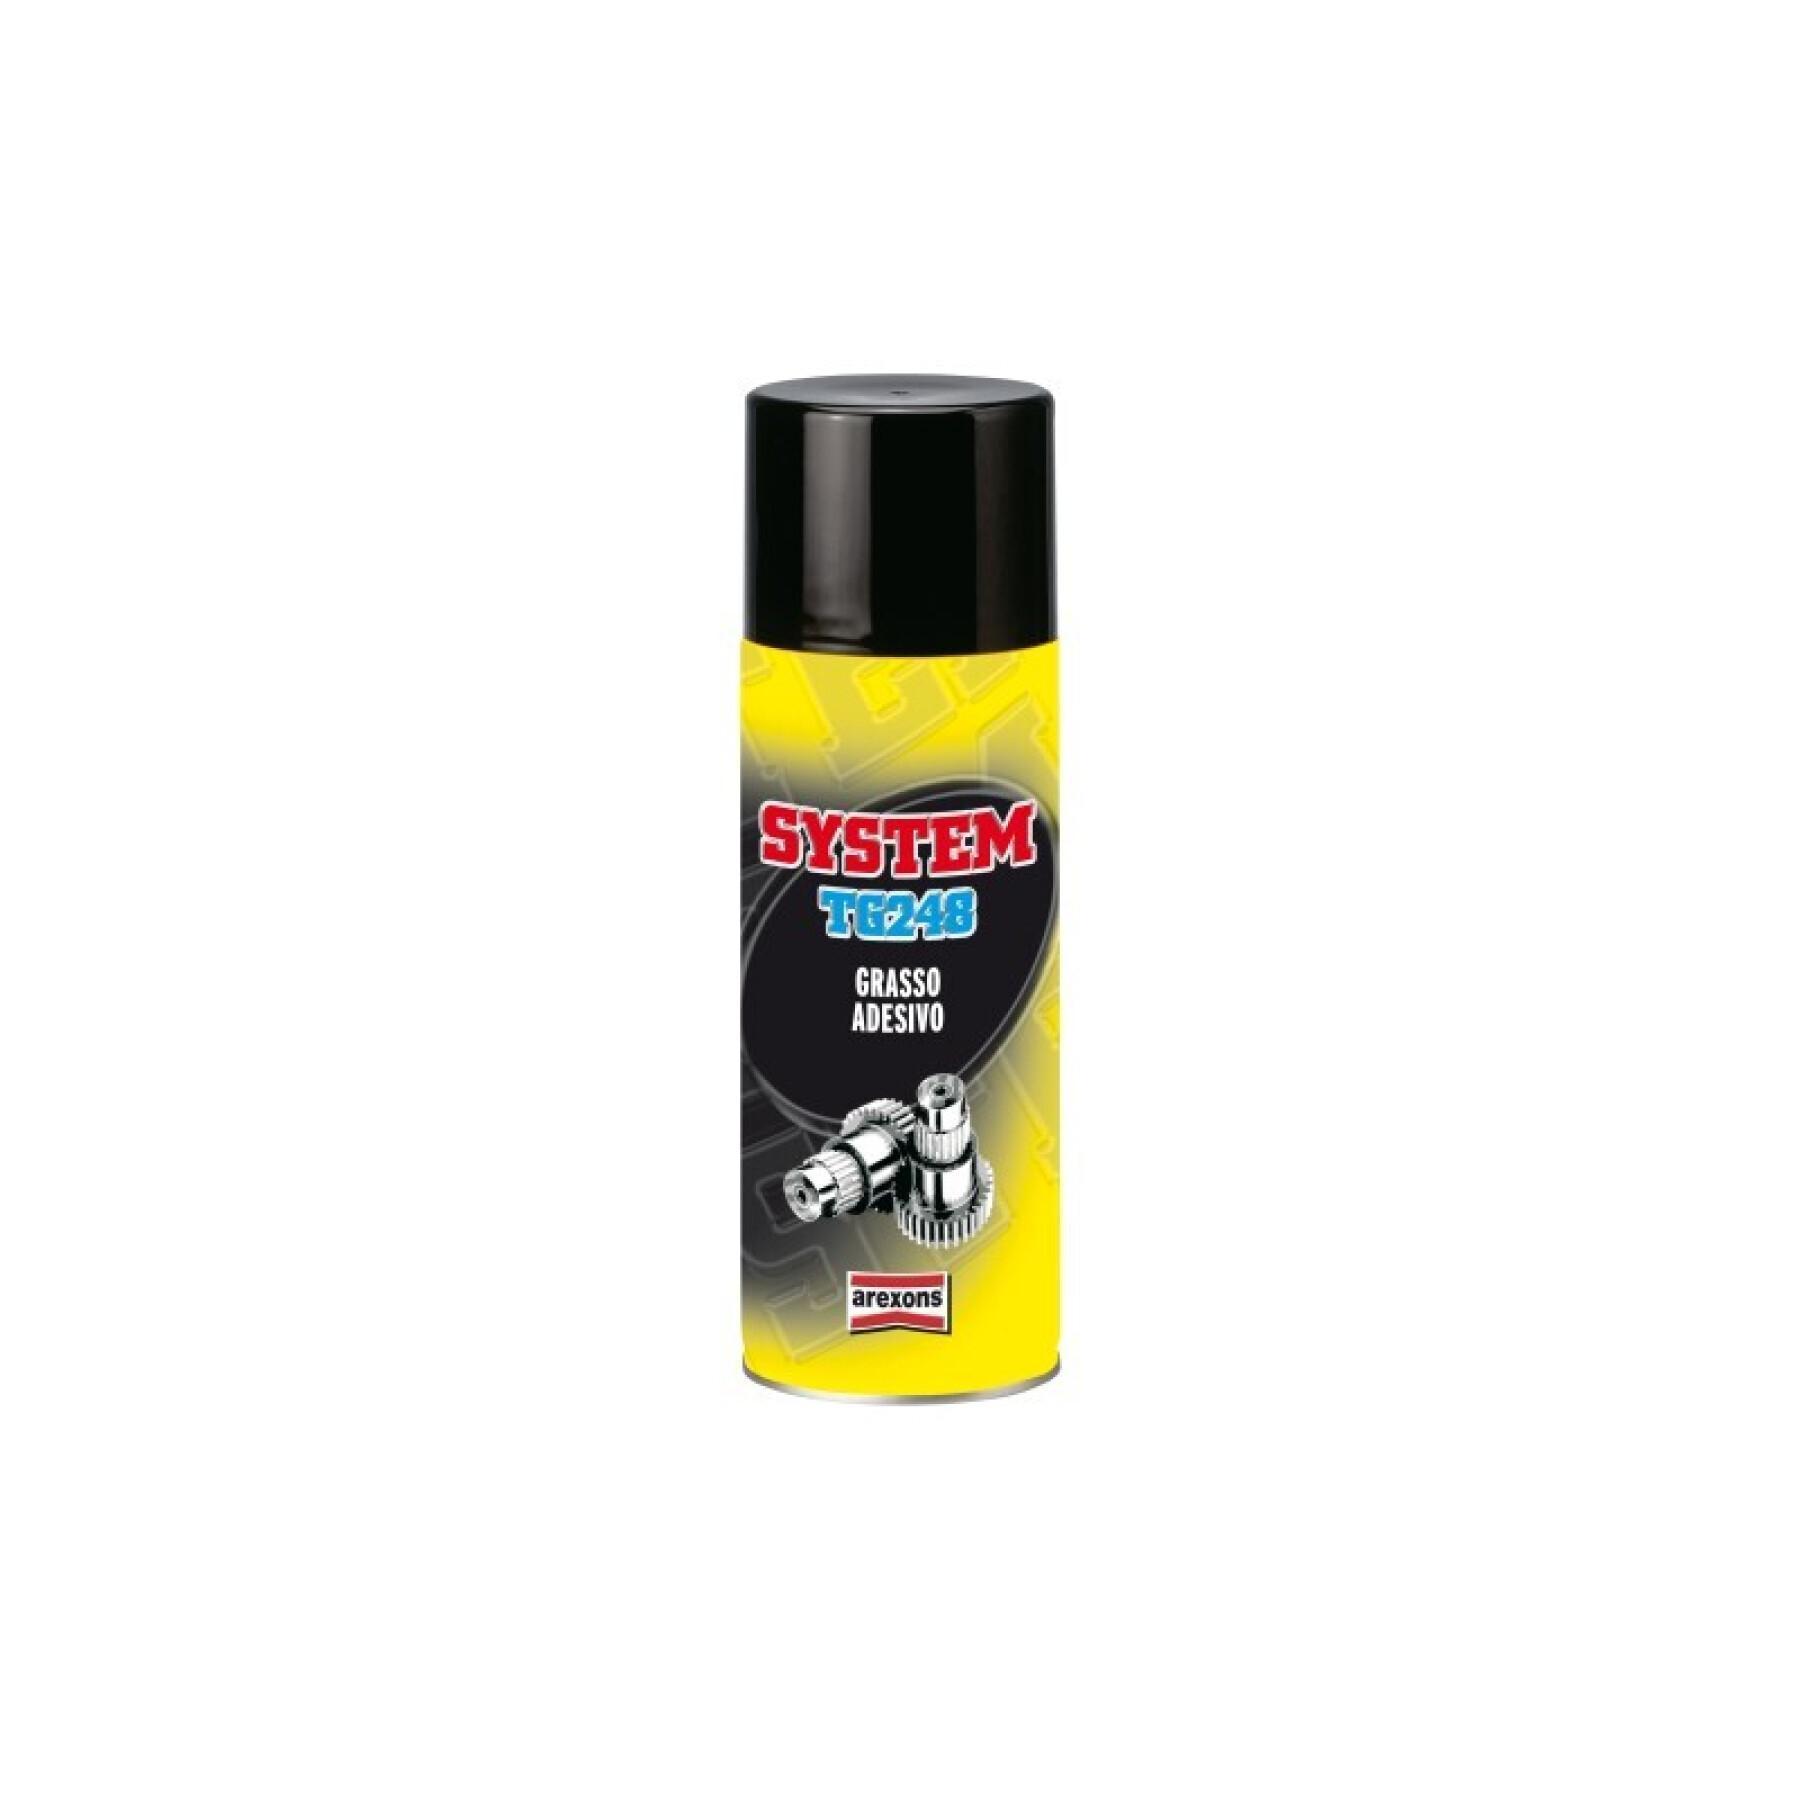 Motorcycle lubricant adhesive grease Arexons Spray